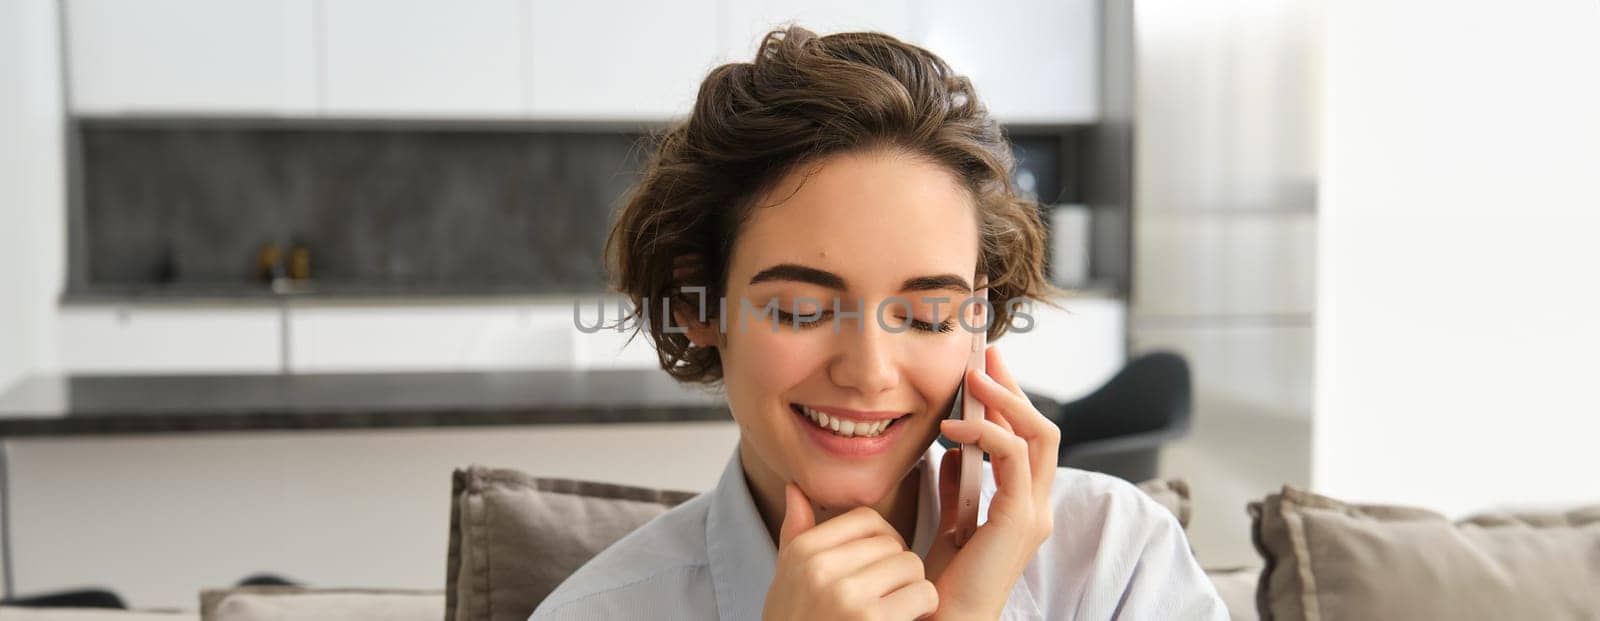 Close up portrait of smiling beautiful woman, talking on mobile phone, chats on smartphone, calls someone, sits at home.